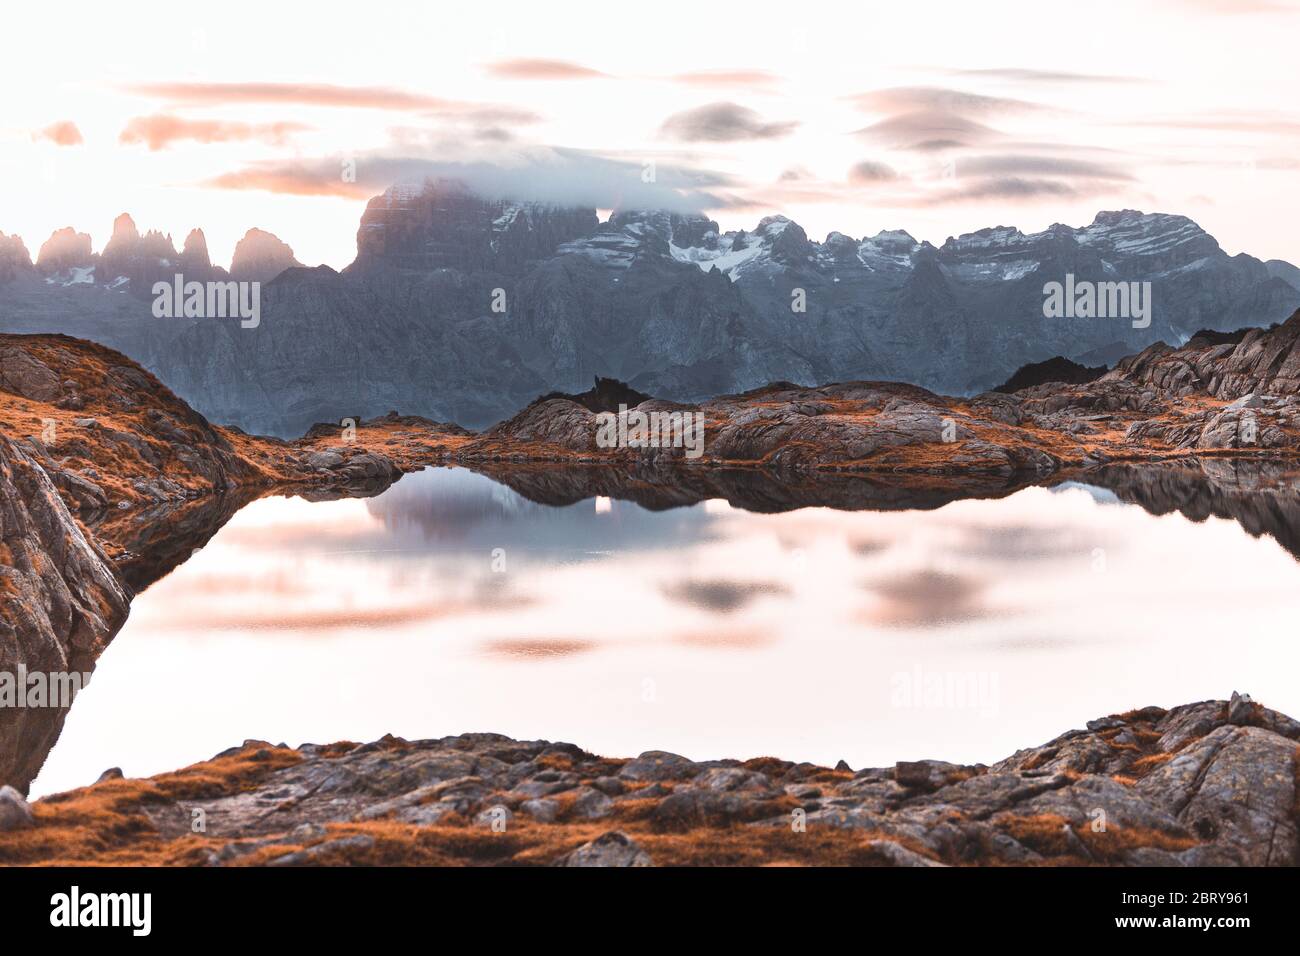 Beautiful landscape with high mountains with illuminated peaks, stones in mountain lake, reflection, blue sky and yellow sunlight in sunrise. Lago Ner Stock Photo